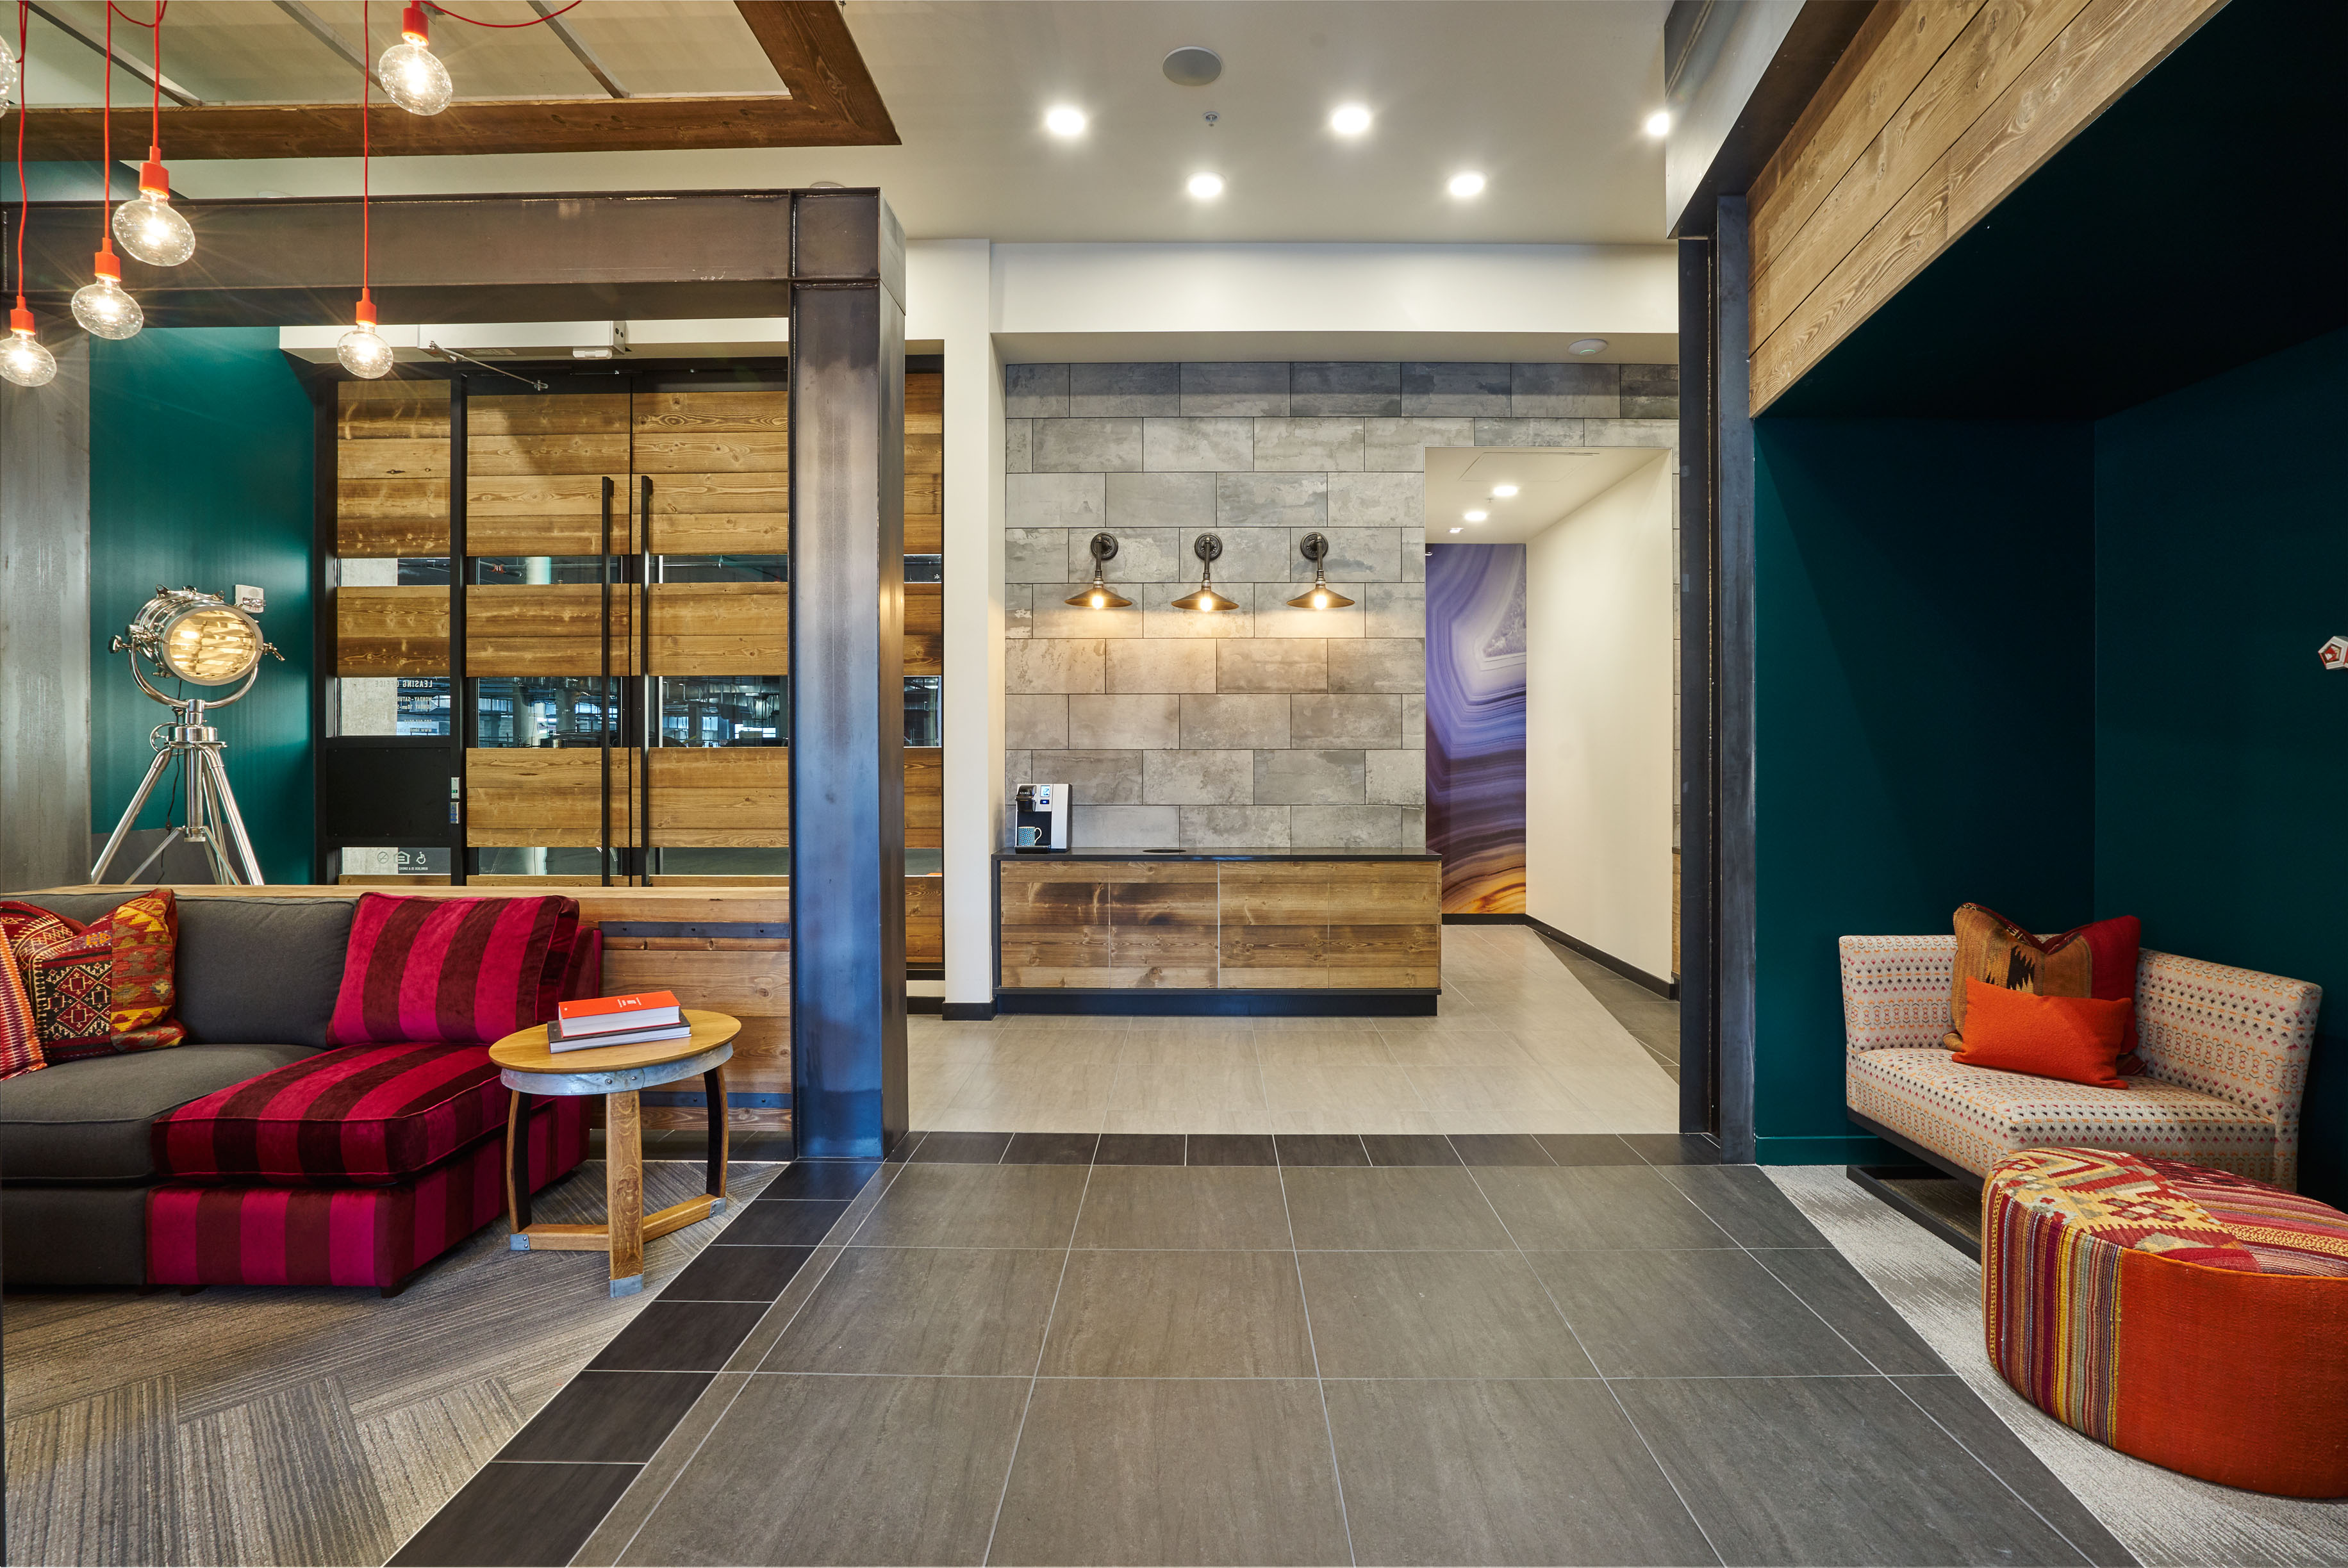 Portland Interior Design Firm Uses Creative Color Solutions for WayFinding in New Multifamily